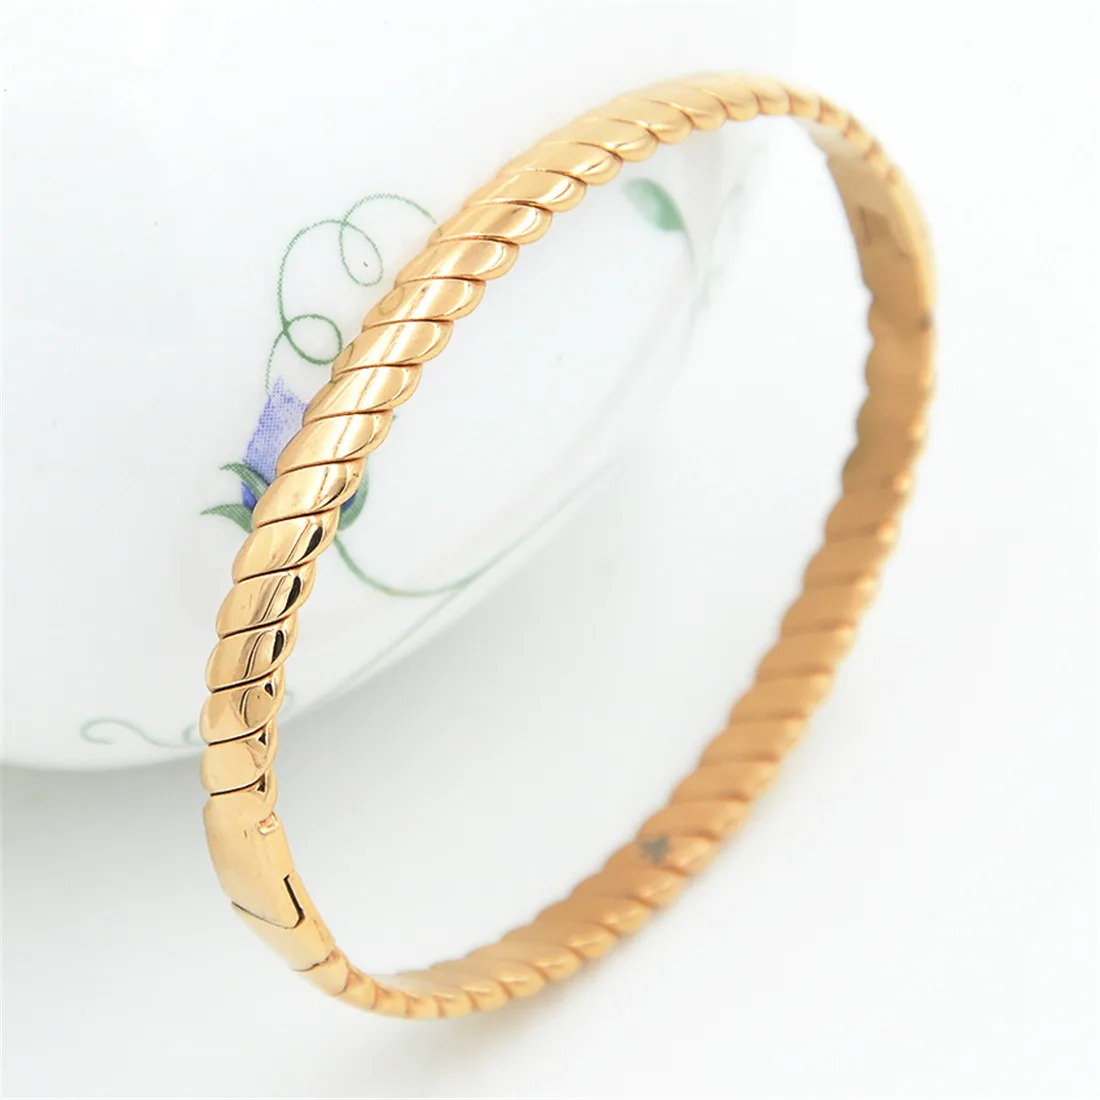 

Gold Plated Stainless Steel Bracelet Never Fade Jewelry for Women Men's Lover Cuff Banlge